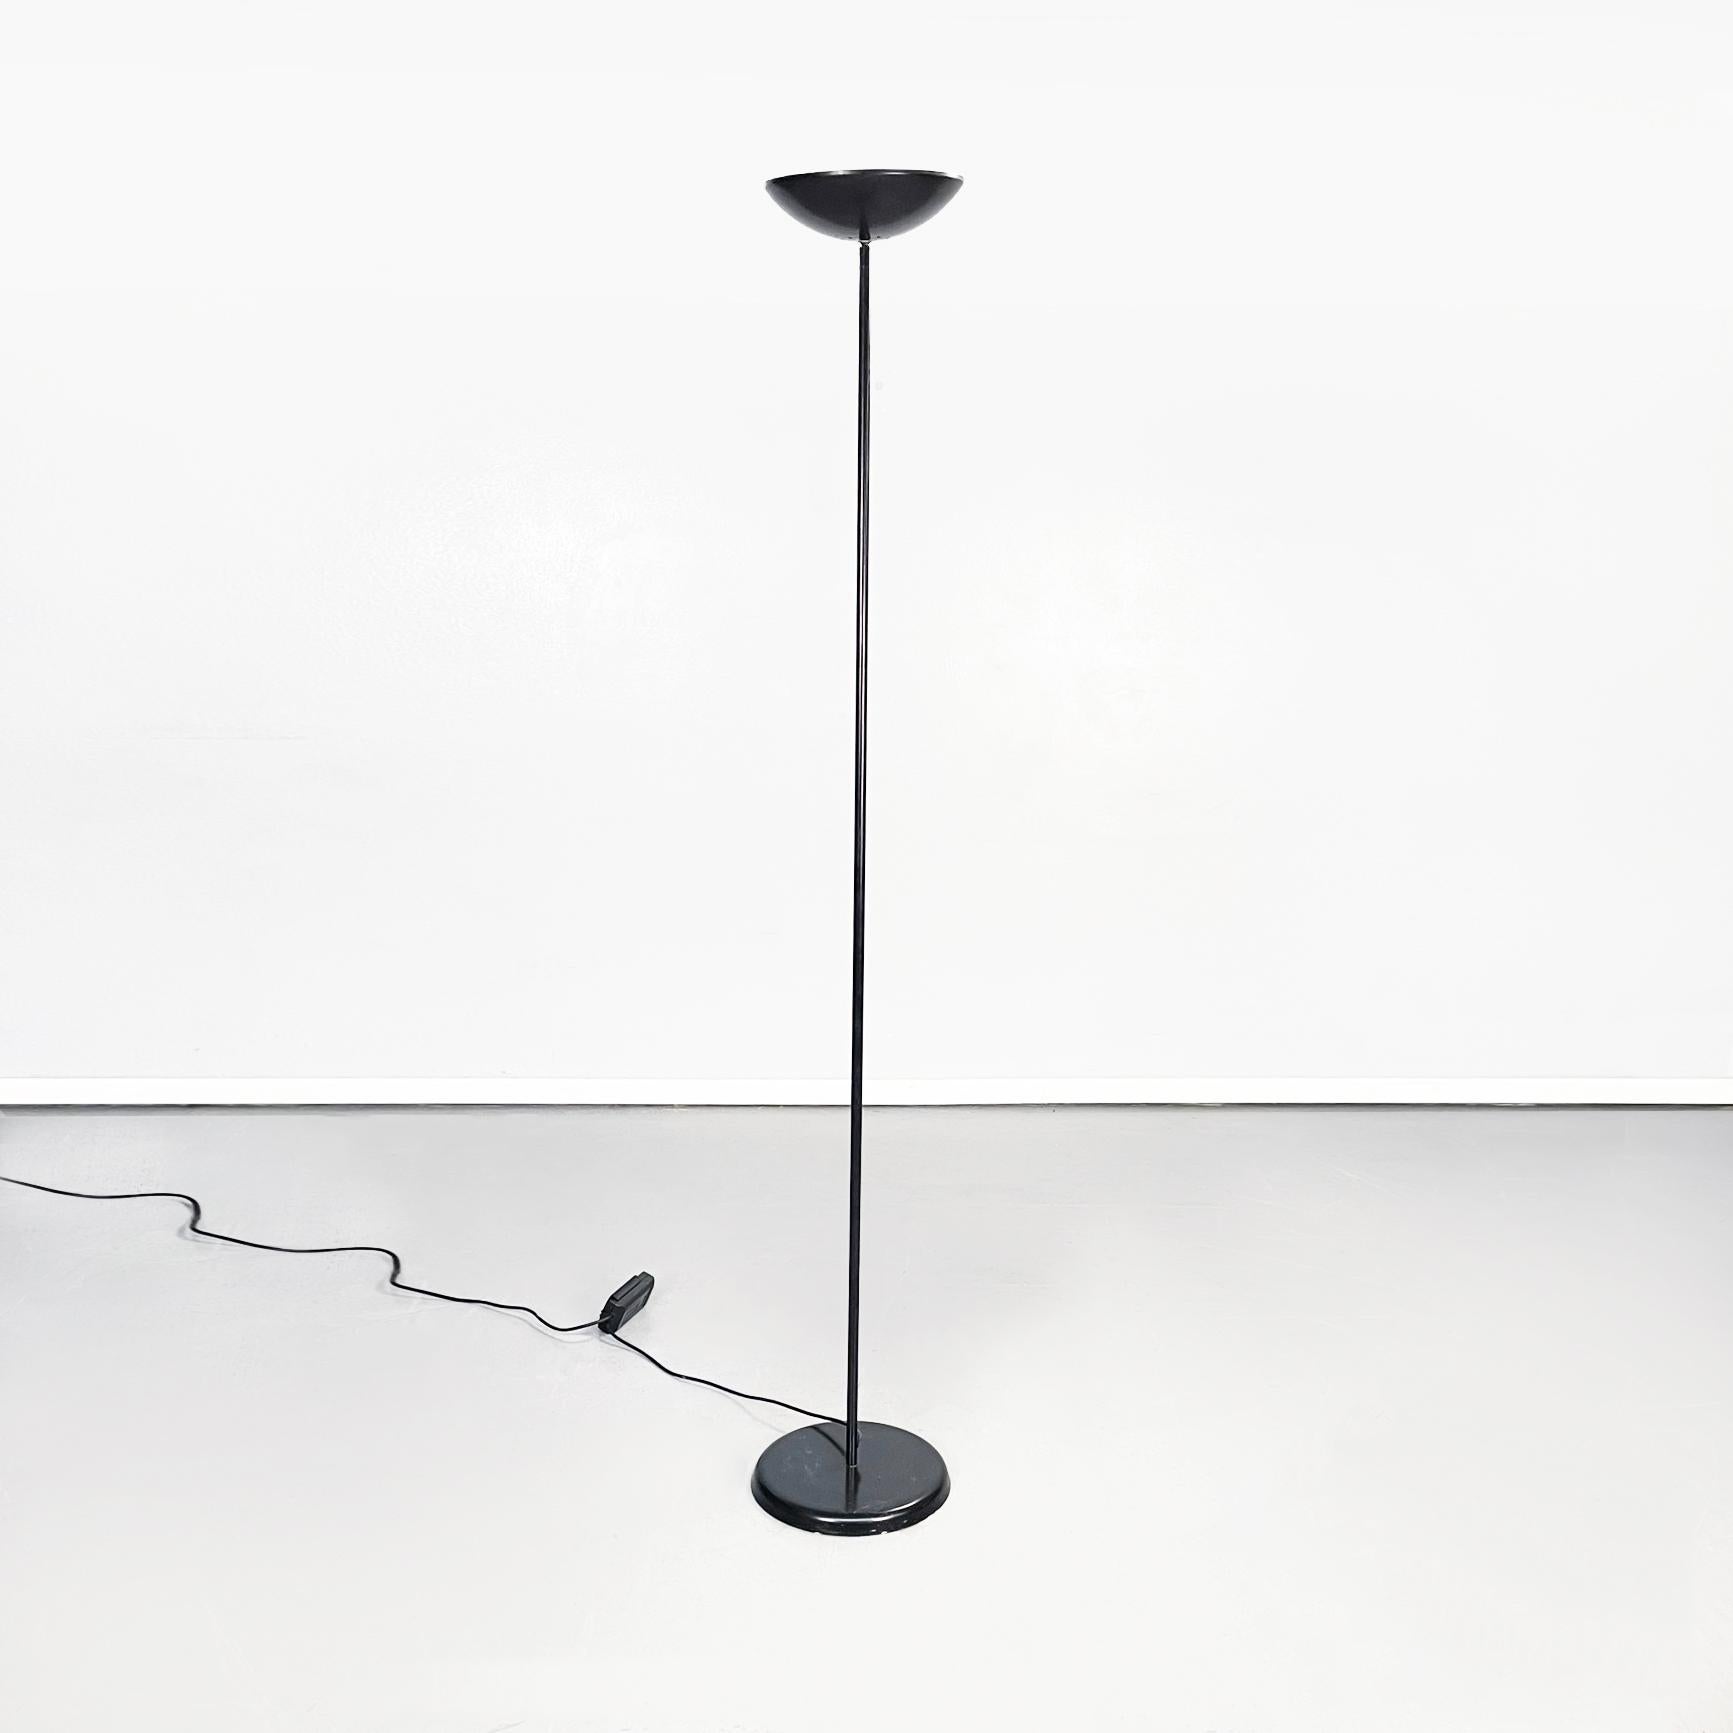 Italian modern Round floor lamp in black metal, 1990s.
Elegant floor lamp with round base, in black painted metal. The lampshade is hemispherical, which allows diffused upward lighting. The central structure is a thin rod in black metal. This type